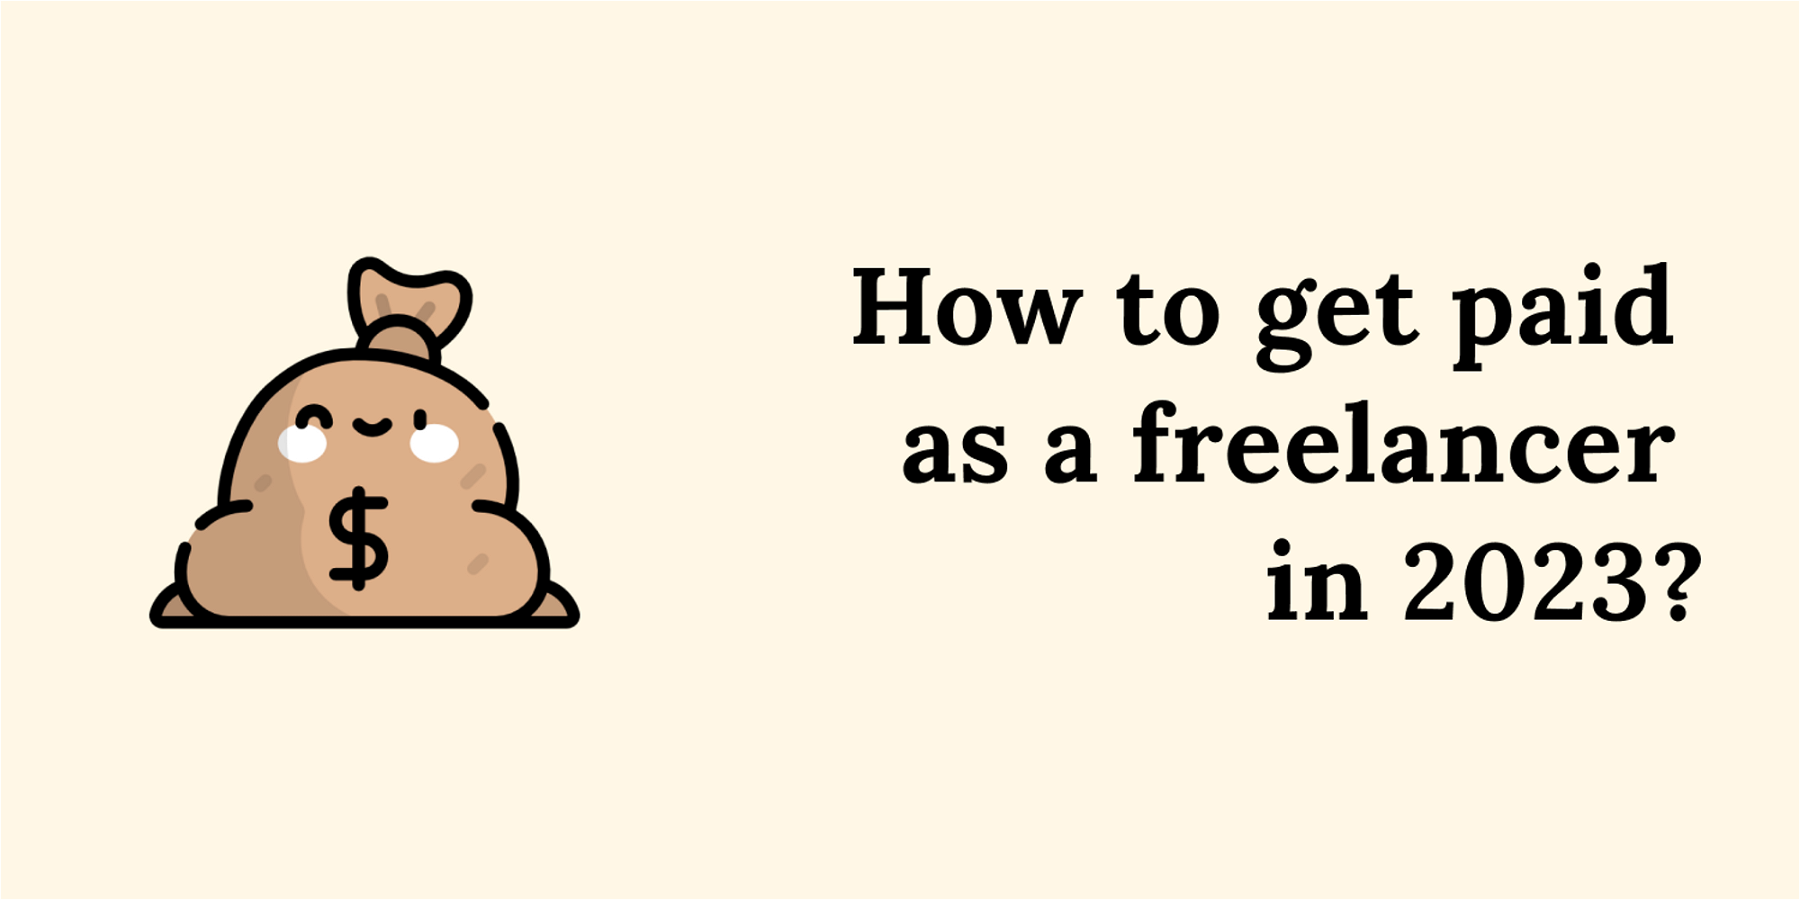 How to get paid as a freelancer?